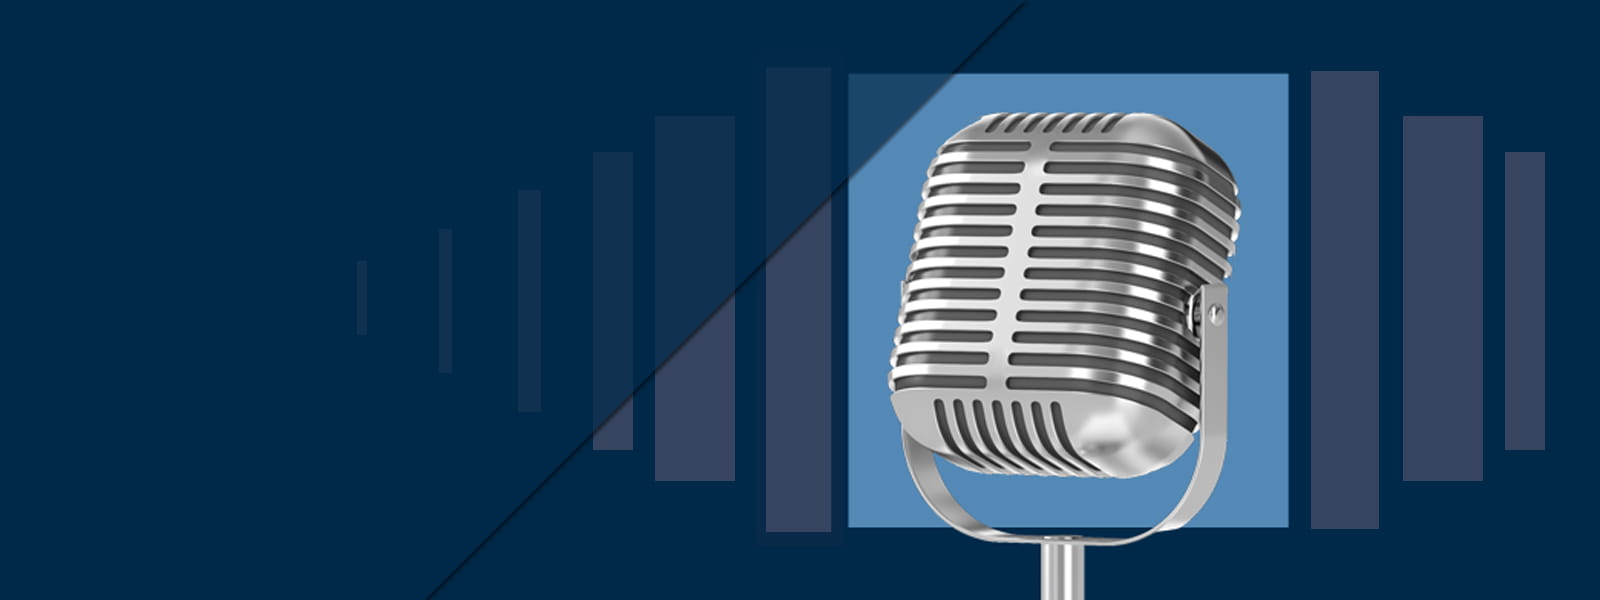 Markets in Focus Podcast